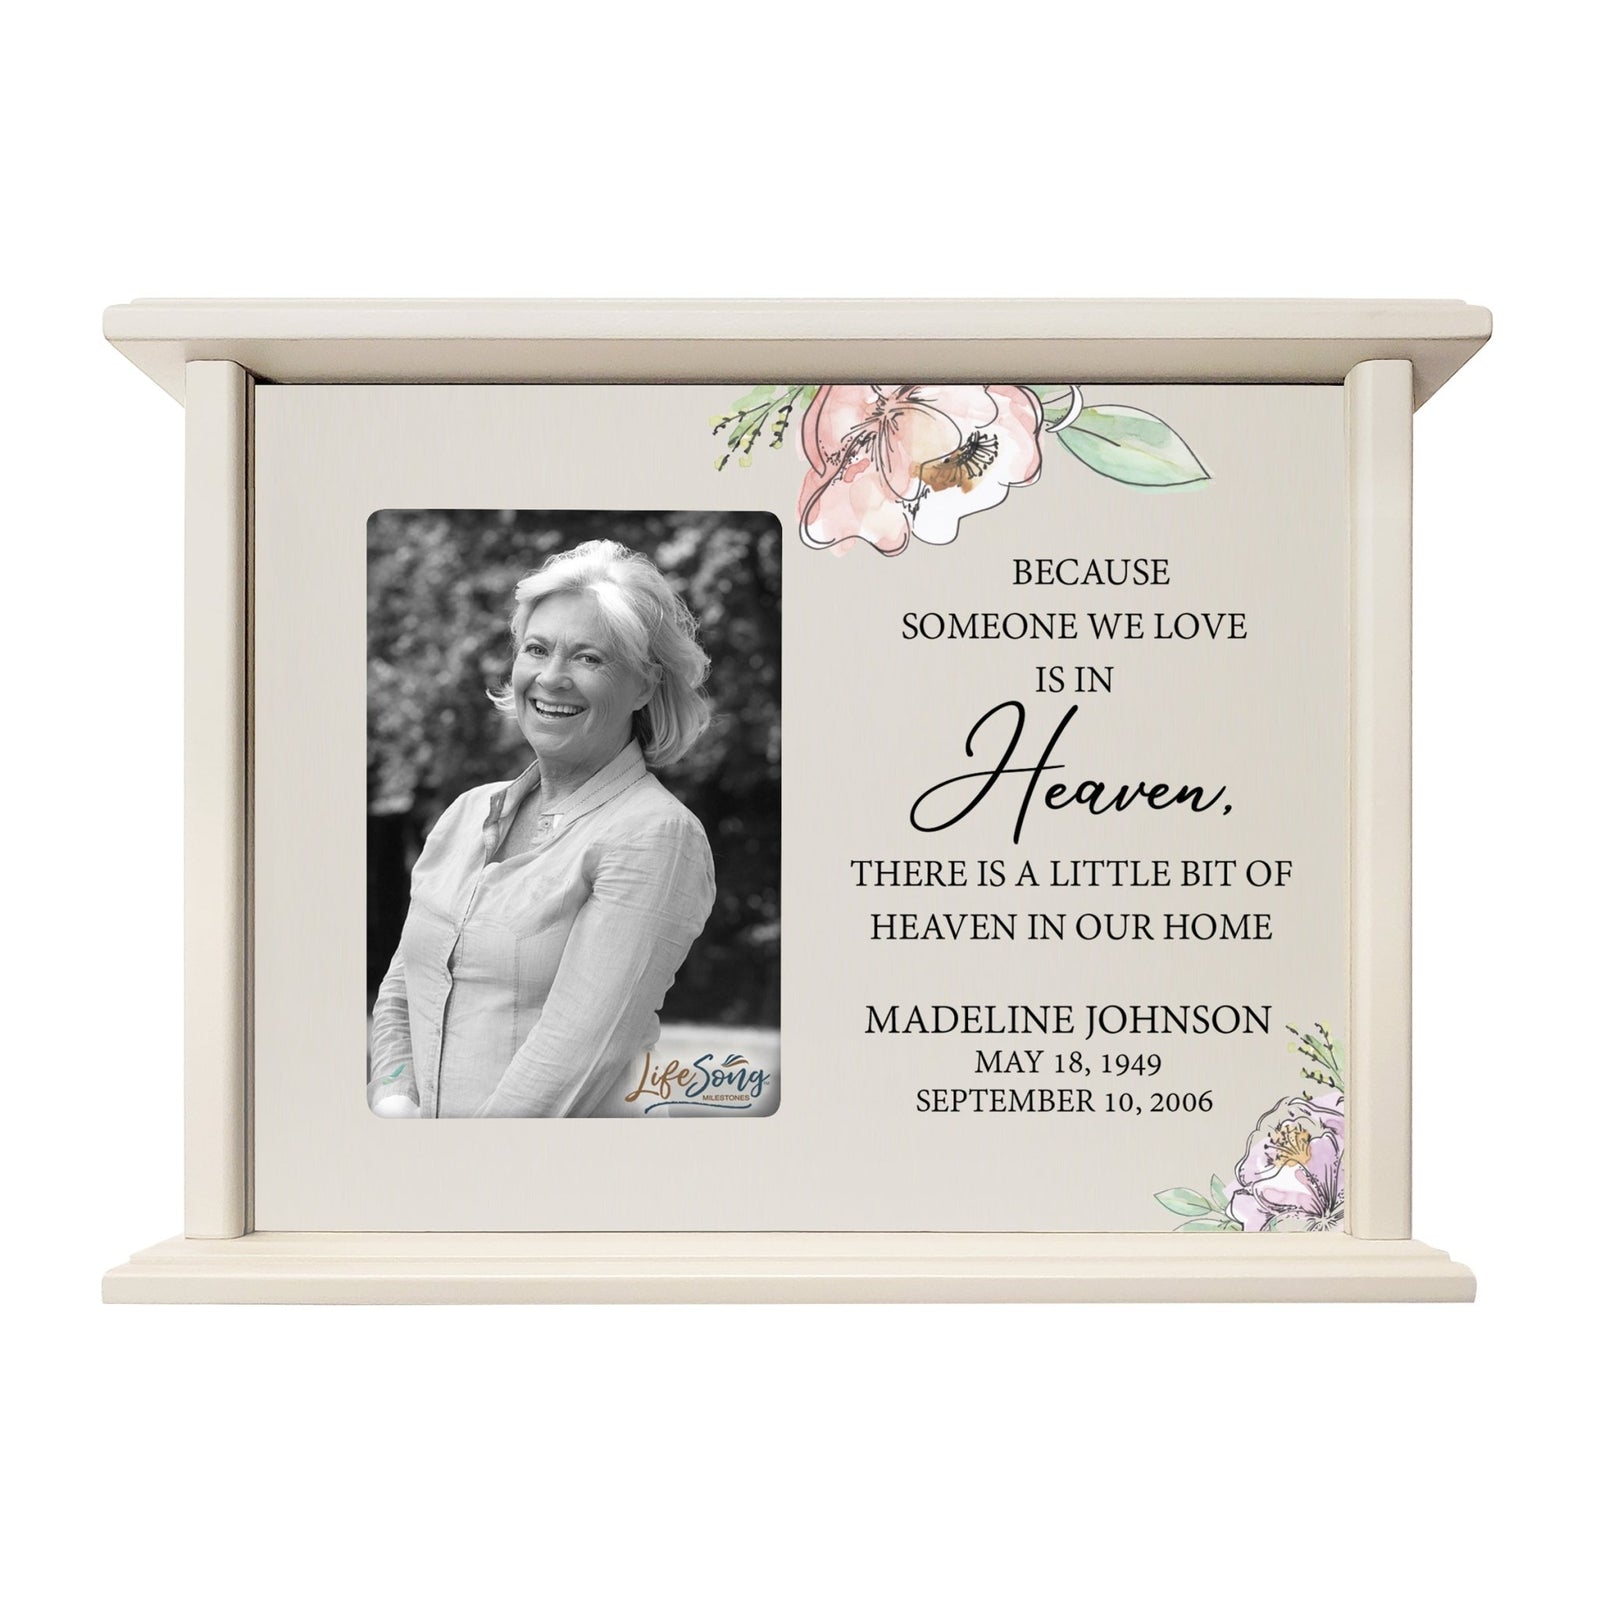 Personalized Memorial Cherry Wood 12 x 4.5 x 9 Cremation Urn Box with Picture Frame holds 200 cu in of Human Ashes and 4x6 Photo - Because Someone We Love (Ivory) - LifeSong Milestones